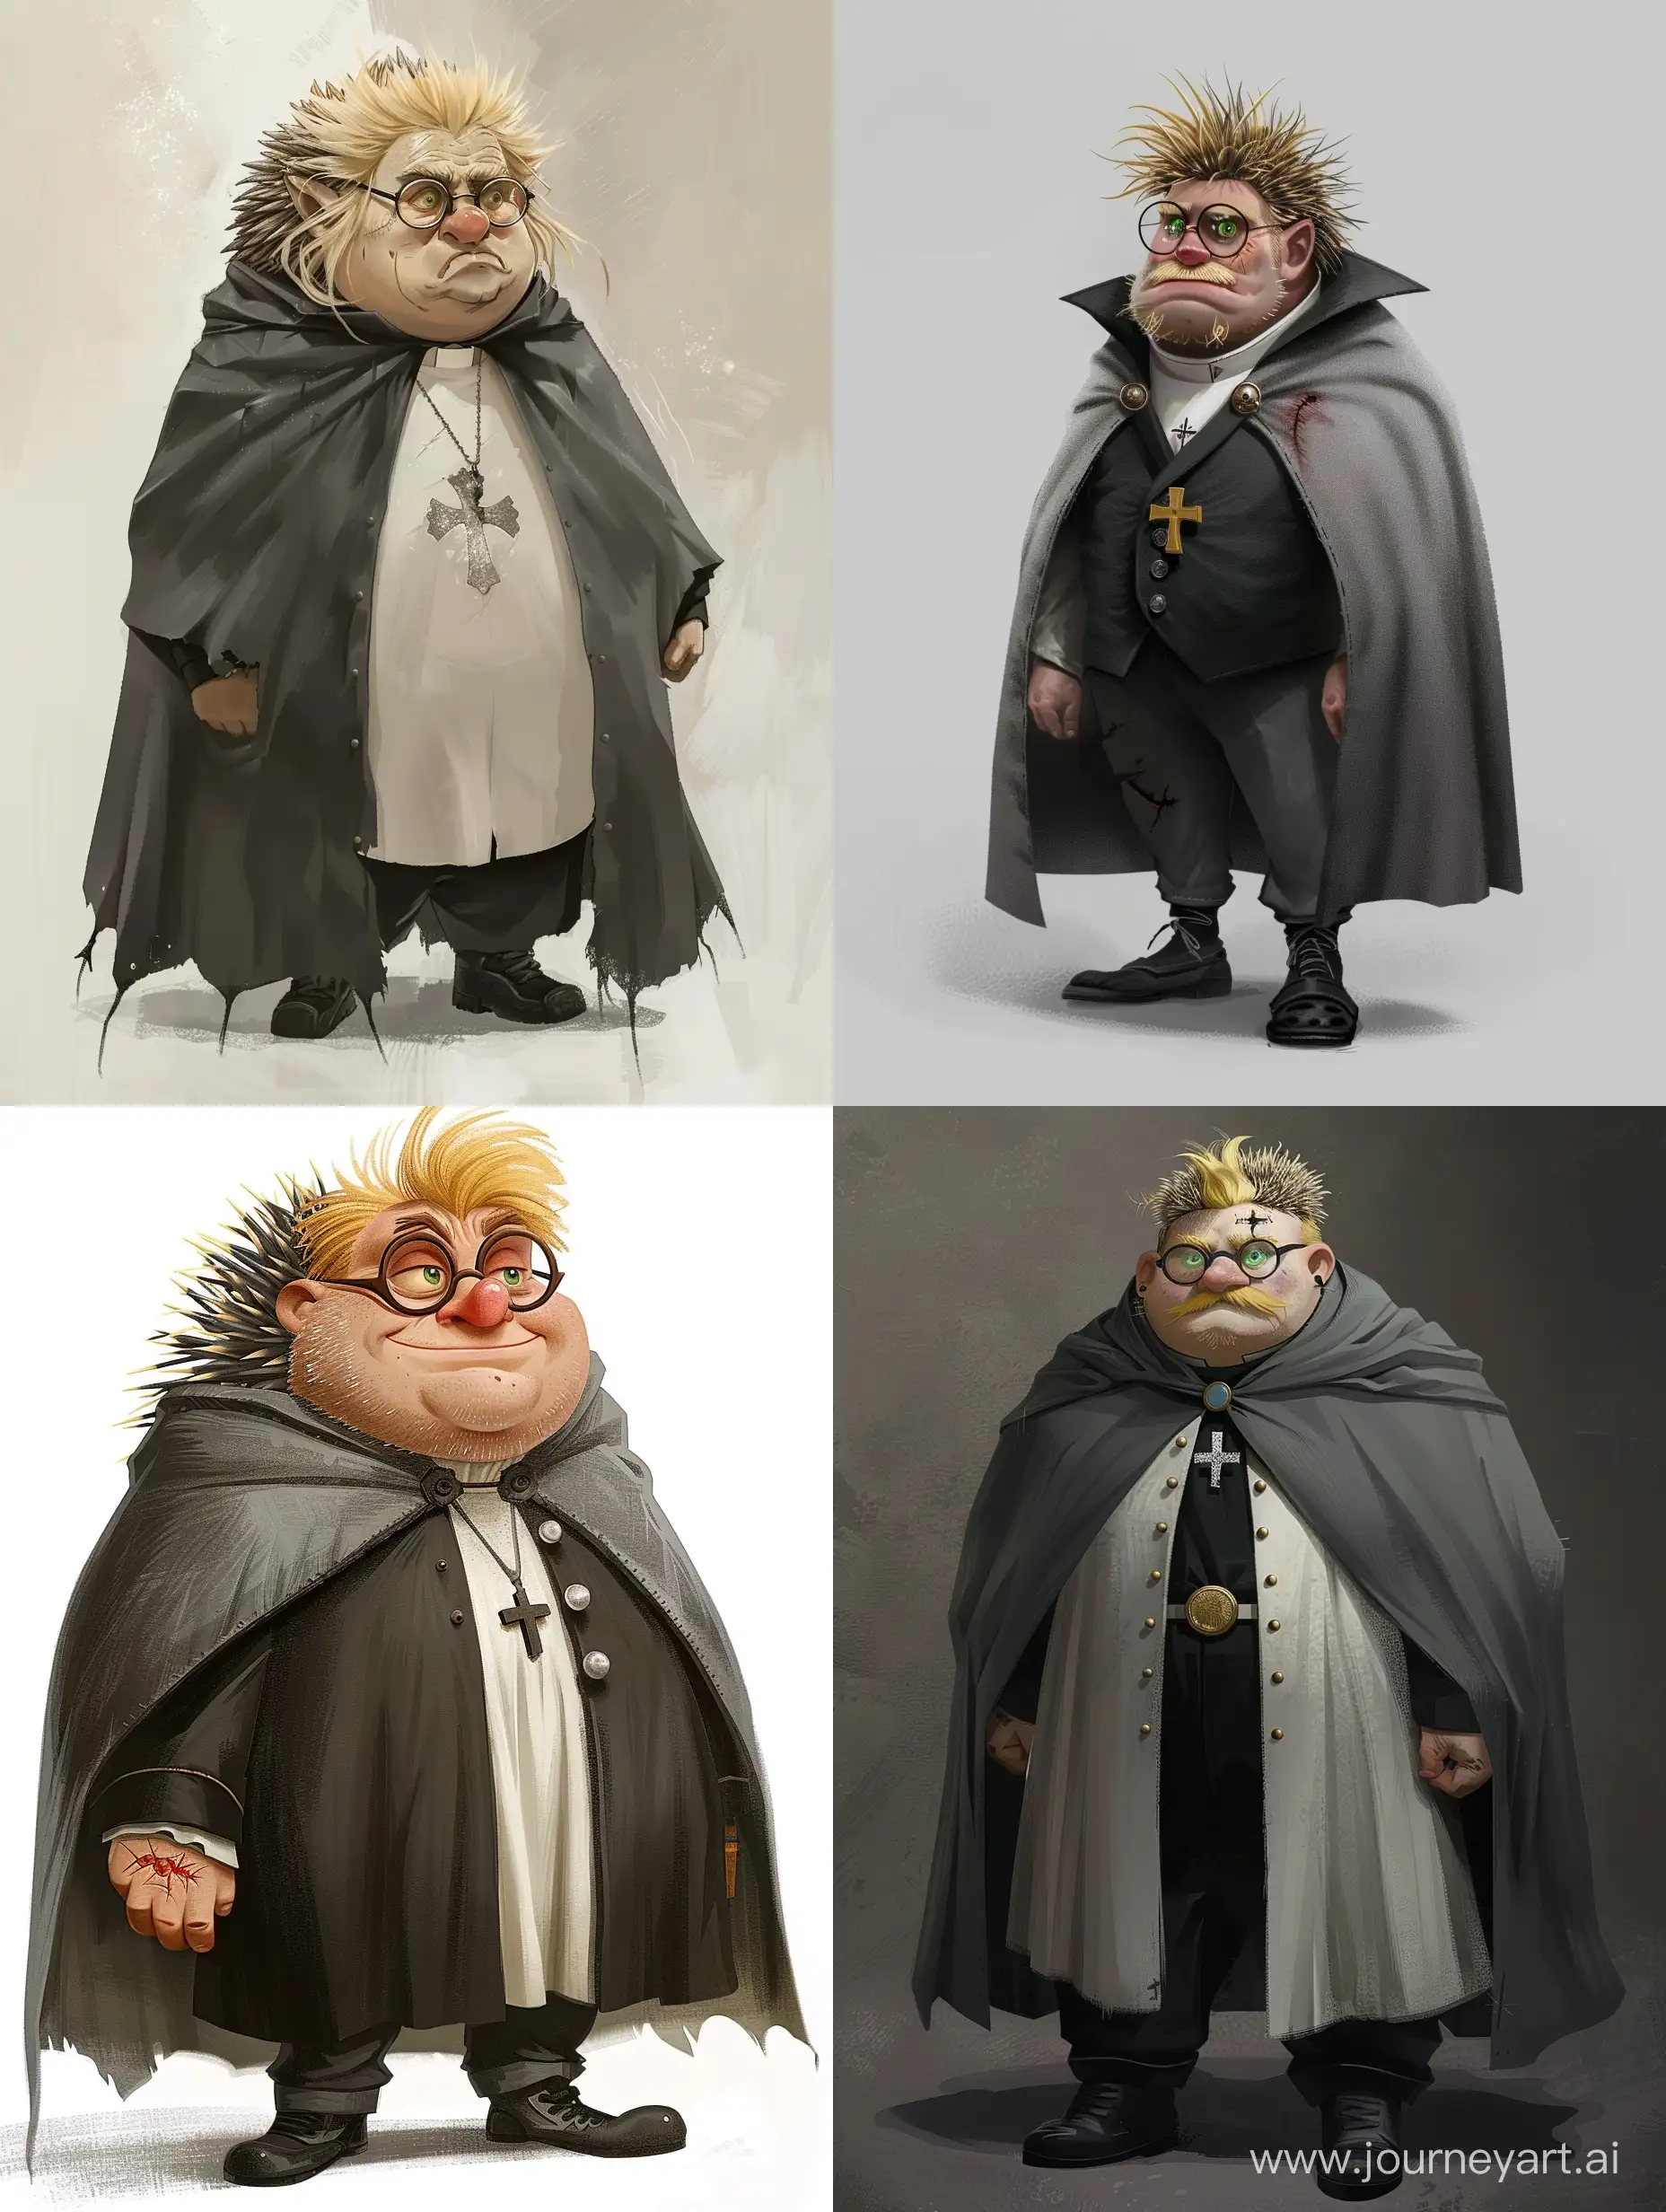 He is tall and blond and has rough features: a big nose, a rounded face. There is a scar on his face, on the left side. Cheeks are always covered with light stubble. He always has green eyes. The hair is blond. They themselves appear in the form of a hedgehog. Over a black or white cassock, he has a gray cloak. He is wearing black pants, black shoes, round glasses on his nose, and a Catholic cross glitters on his chest.
